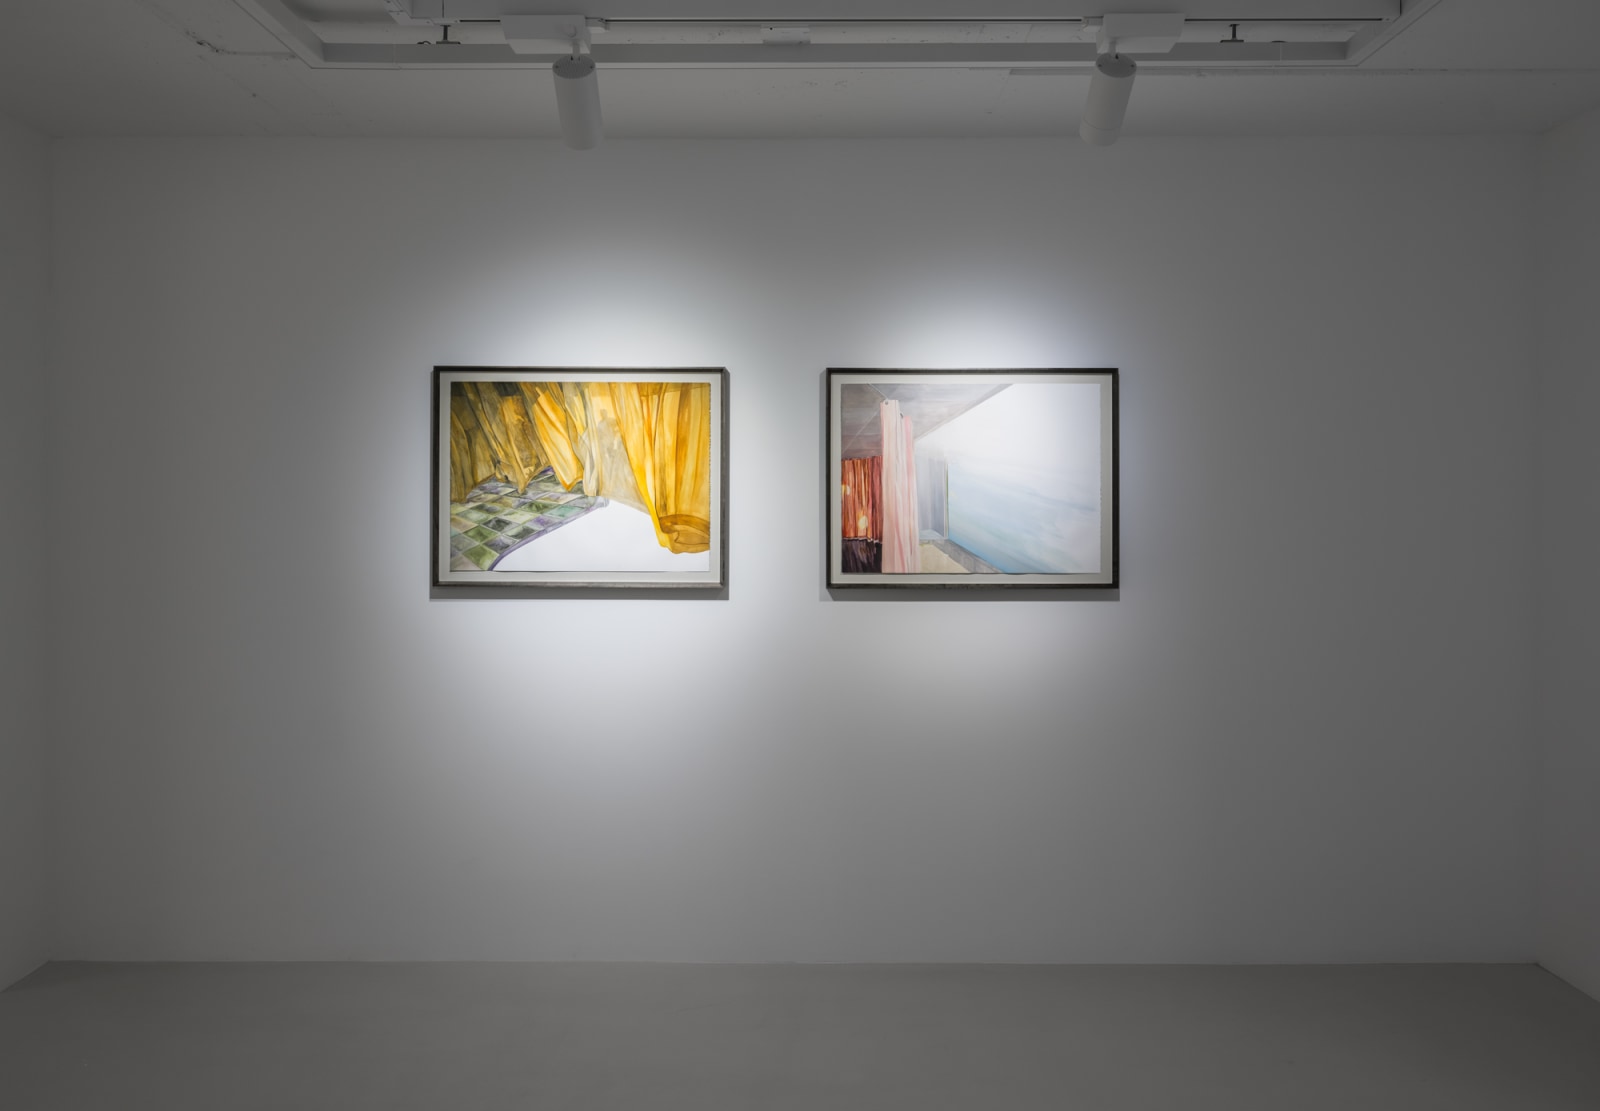 <div class="image_caption_container"><div class="image_caption"><div><div><div><p>Exhibition view: <strong>The Window. Isa Melsheimer</strong>, Esther Schipper, Seoul, 2023. Photo © Hyun Jun Lee </p></div></div></div></div></div>